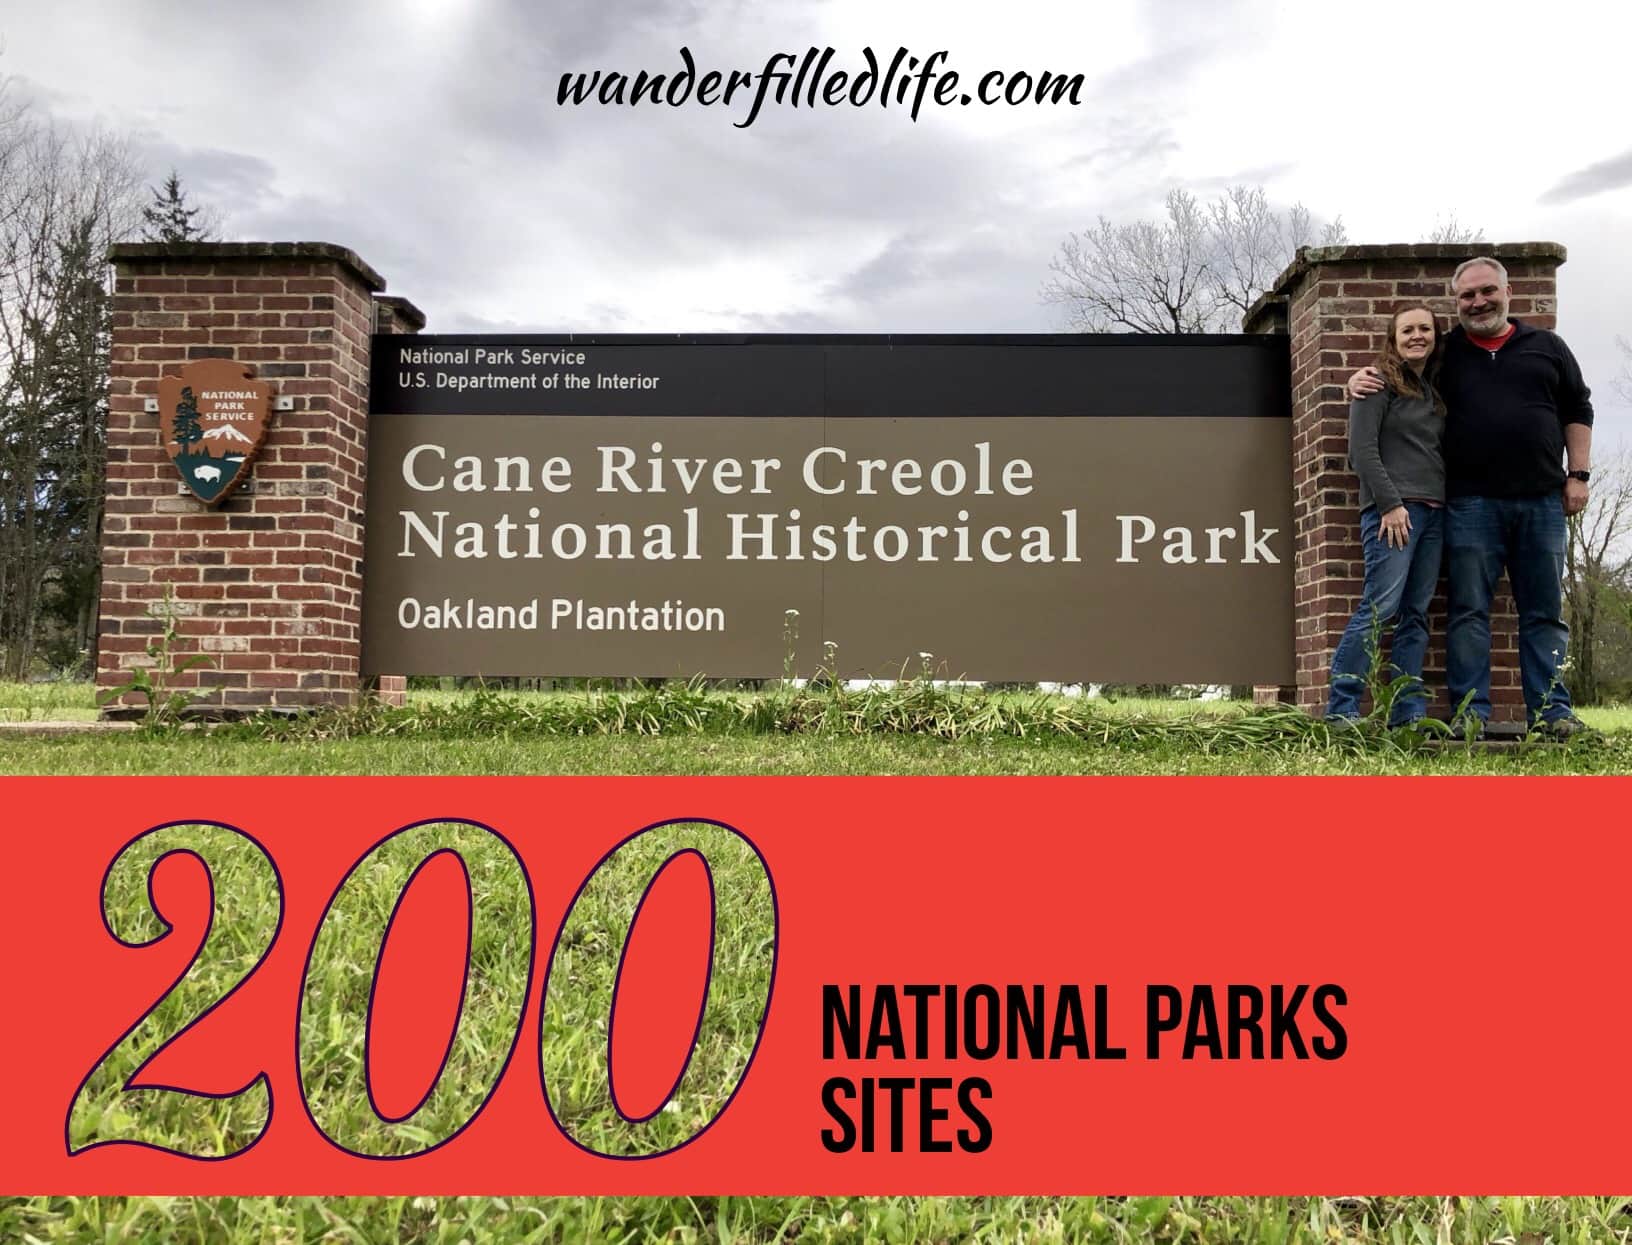 Our April 2019 visit to Cane Rive Creole NHP was the 200th site we've visited together.